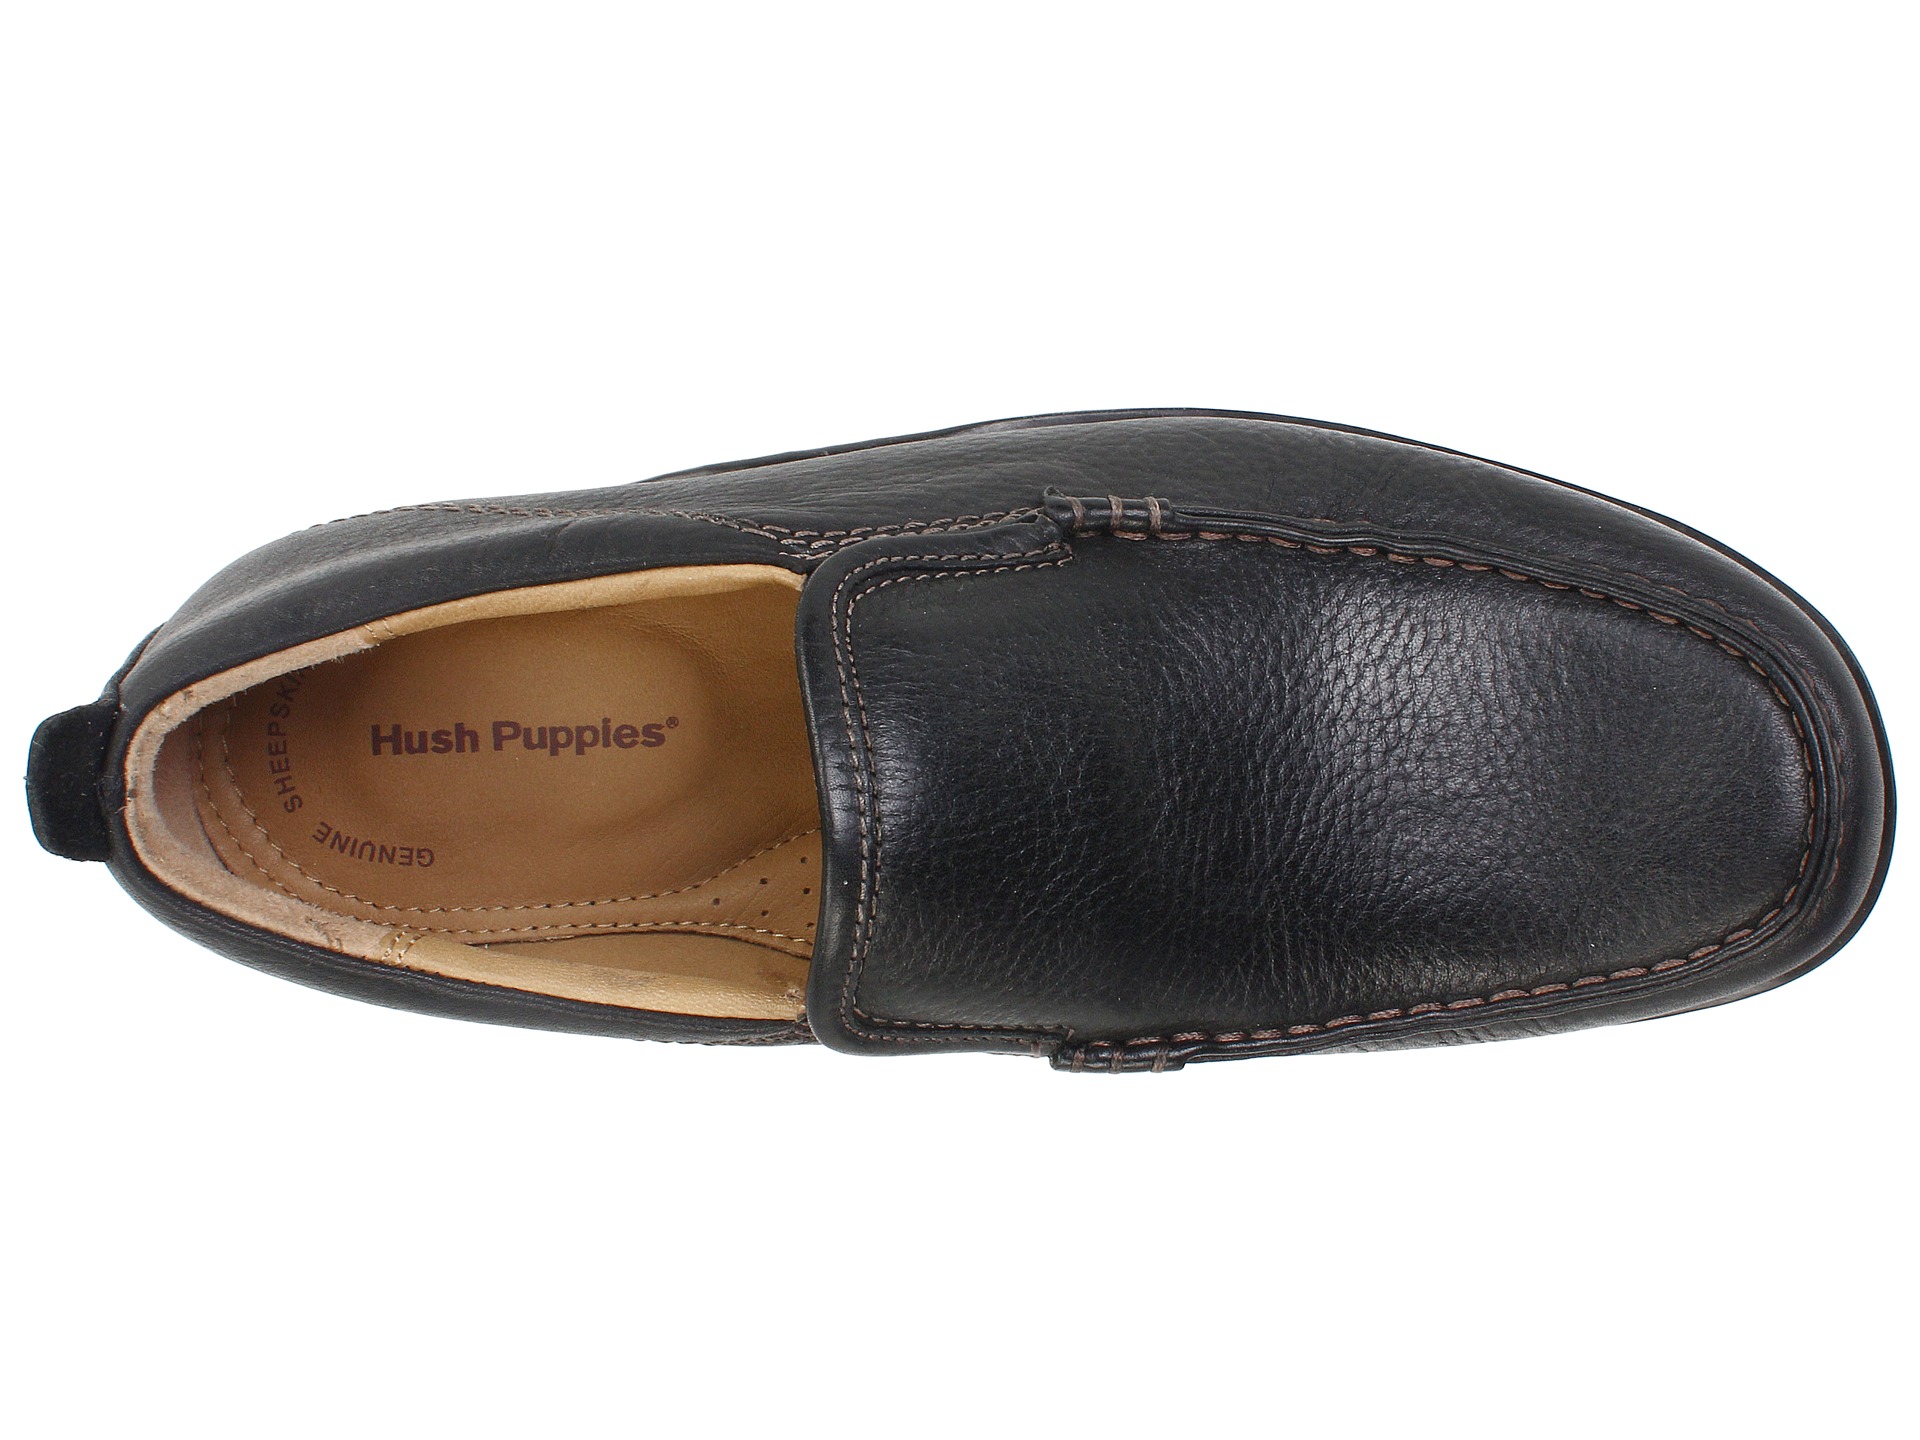 Hush Puppies GT Black Leather - Zappos.com Free Shipping BOTH Ways